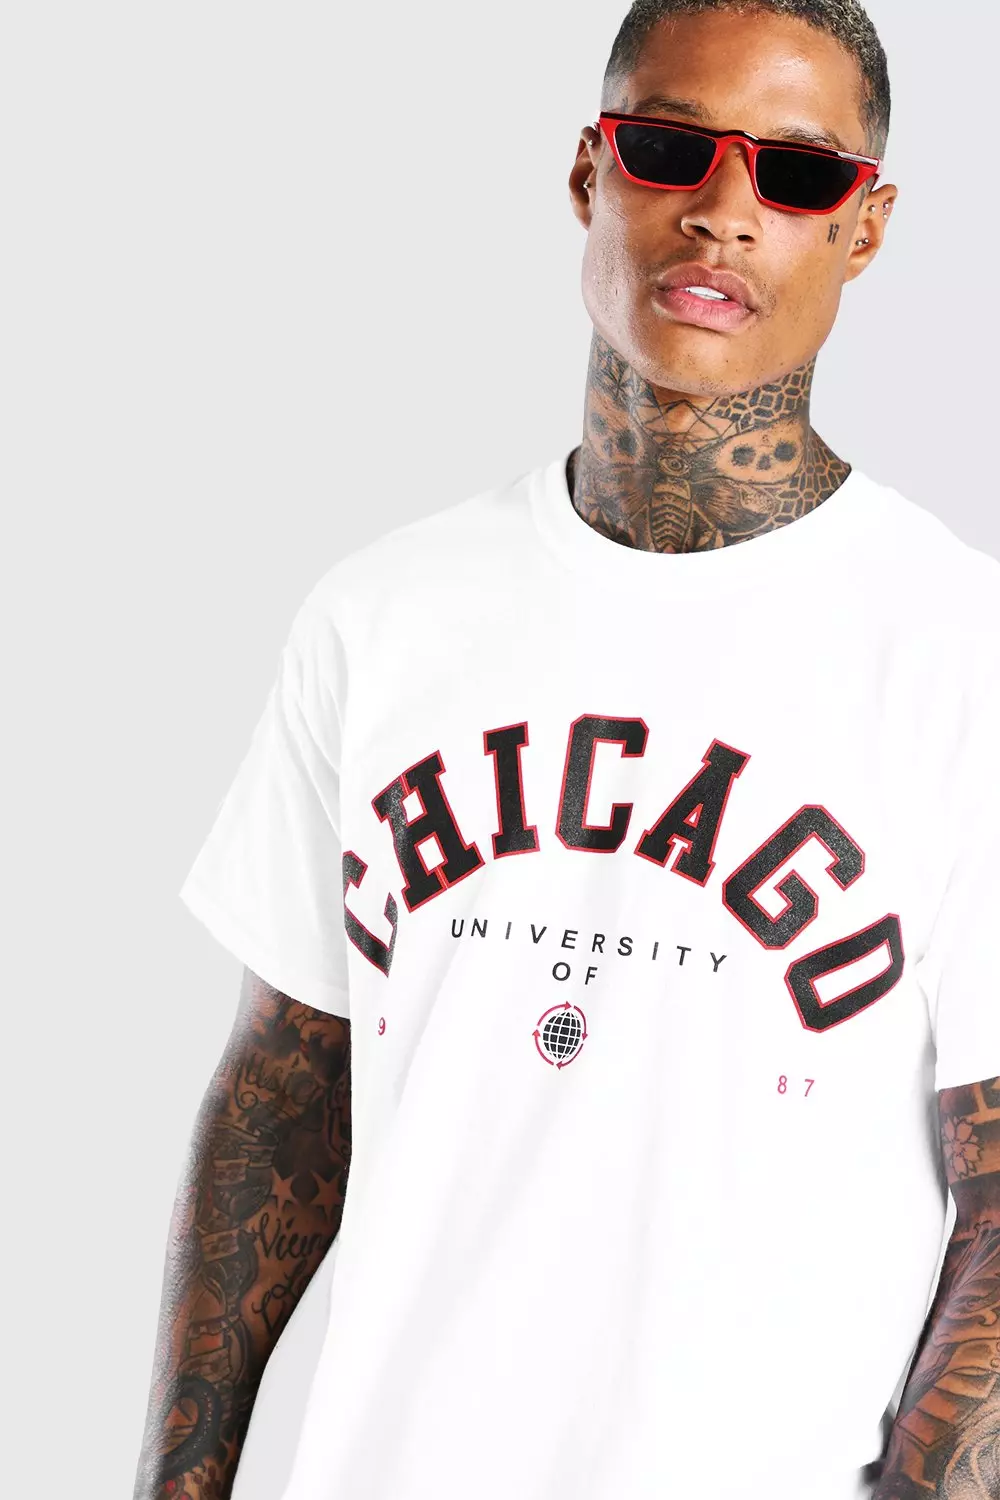 Chicago - Printed Oversized Tees M-L